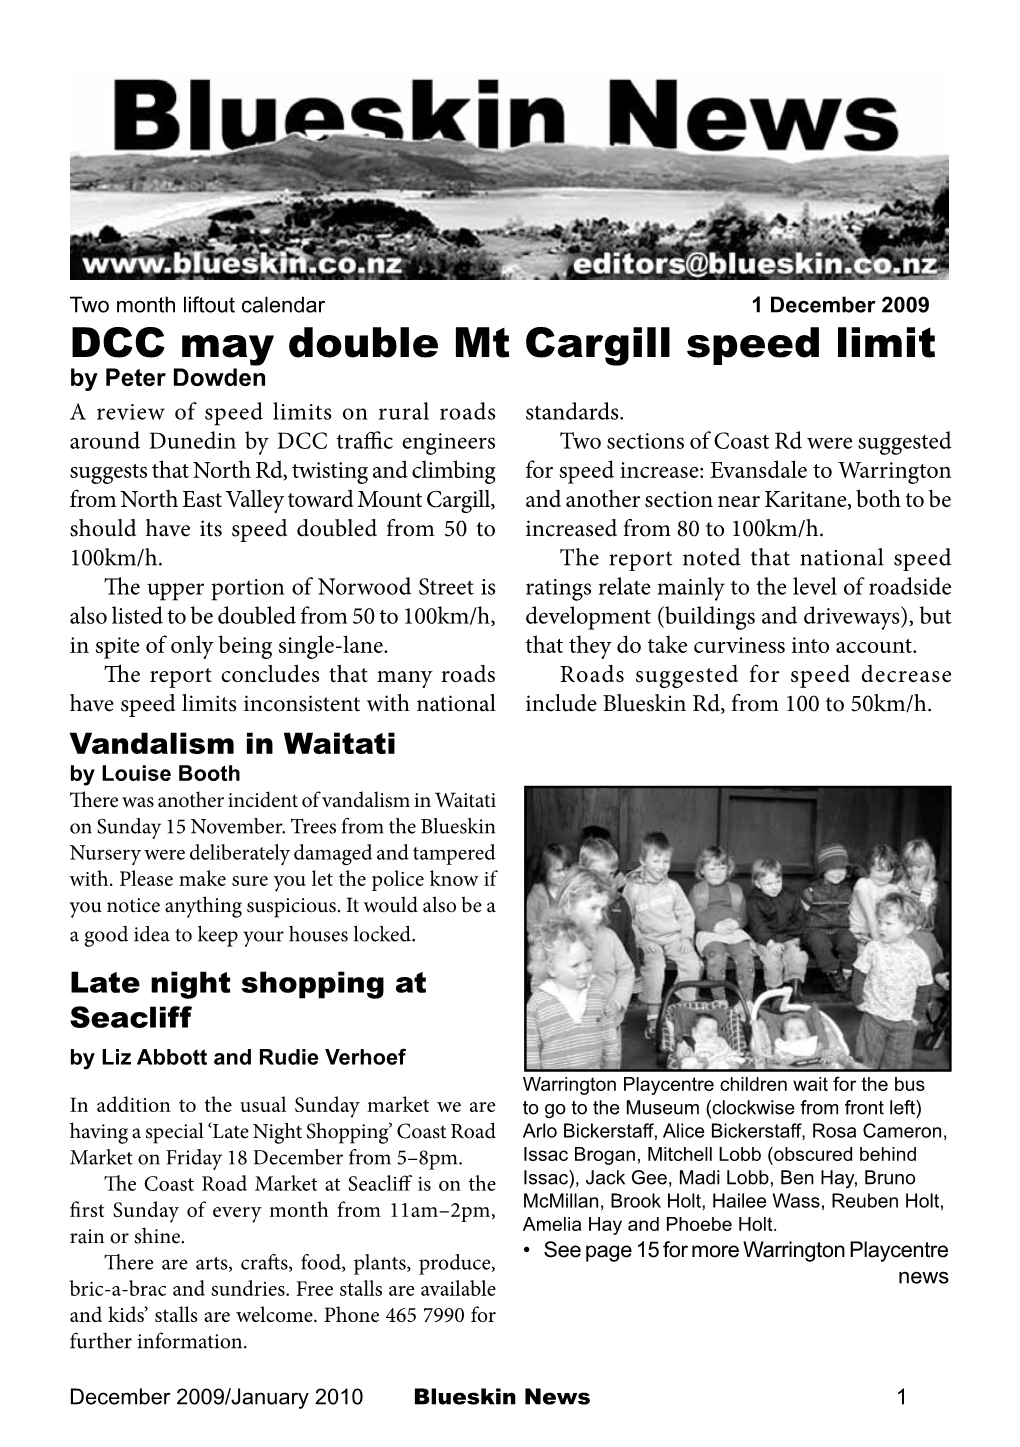 DCC May Double Mt Cargill Speed Limit by Peter Dowden a Review of Speed Limits on Rural Roads Standards